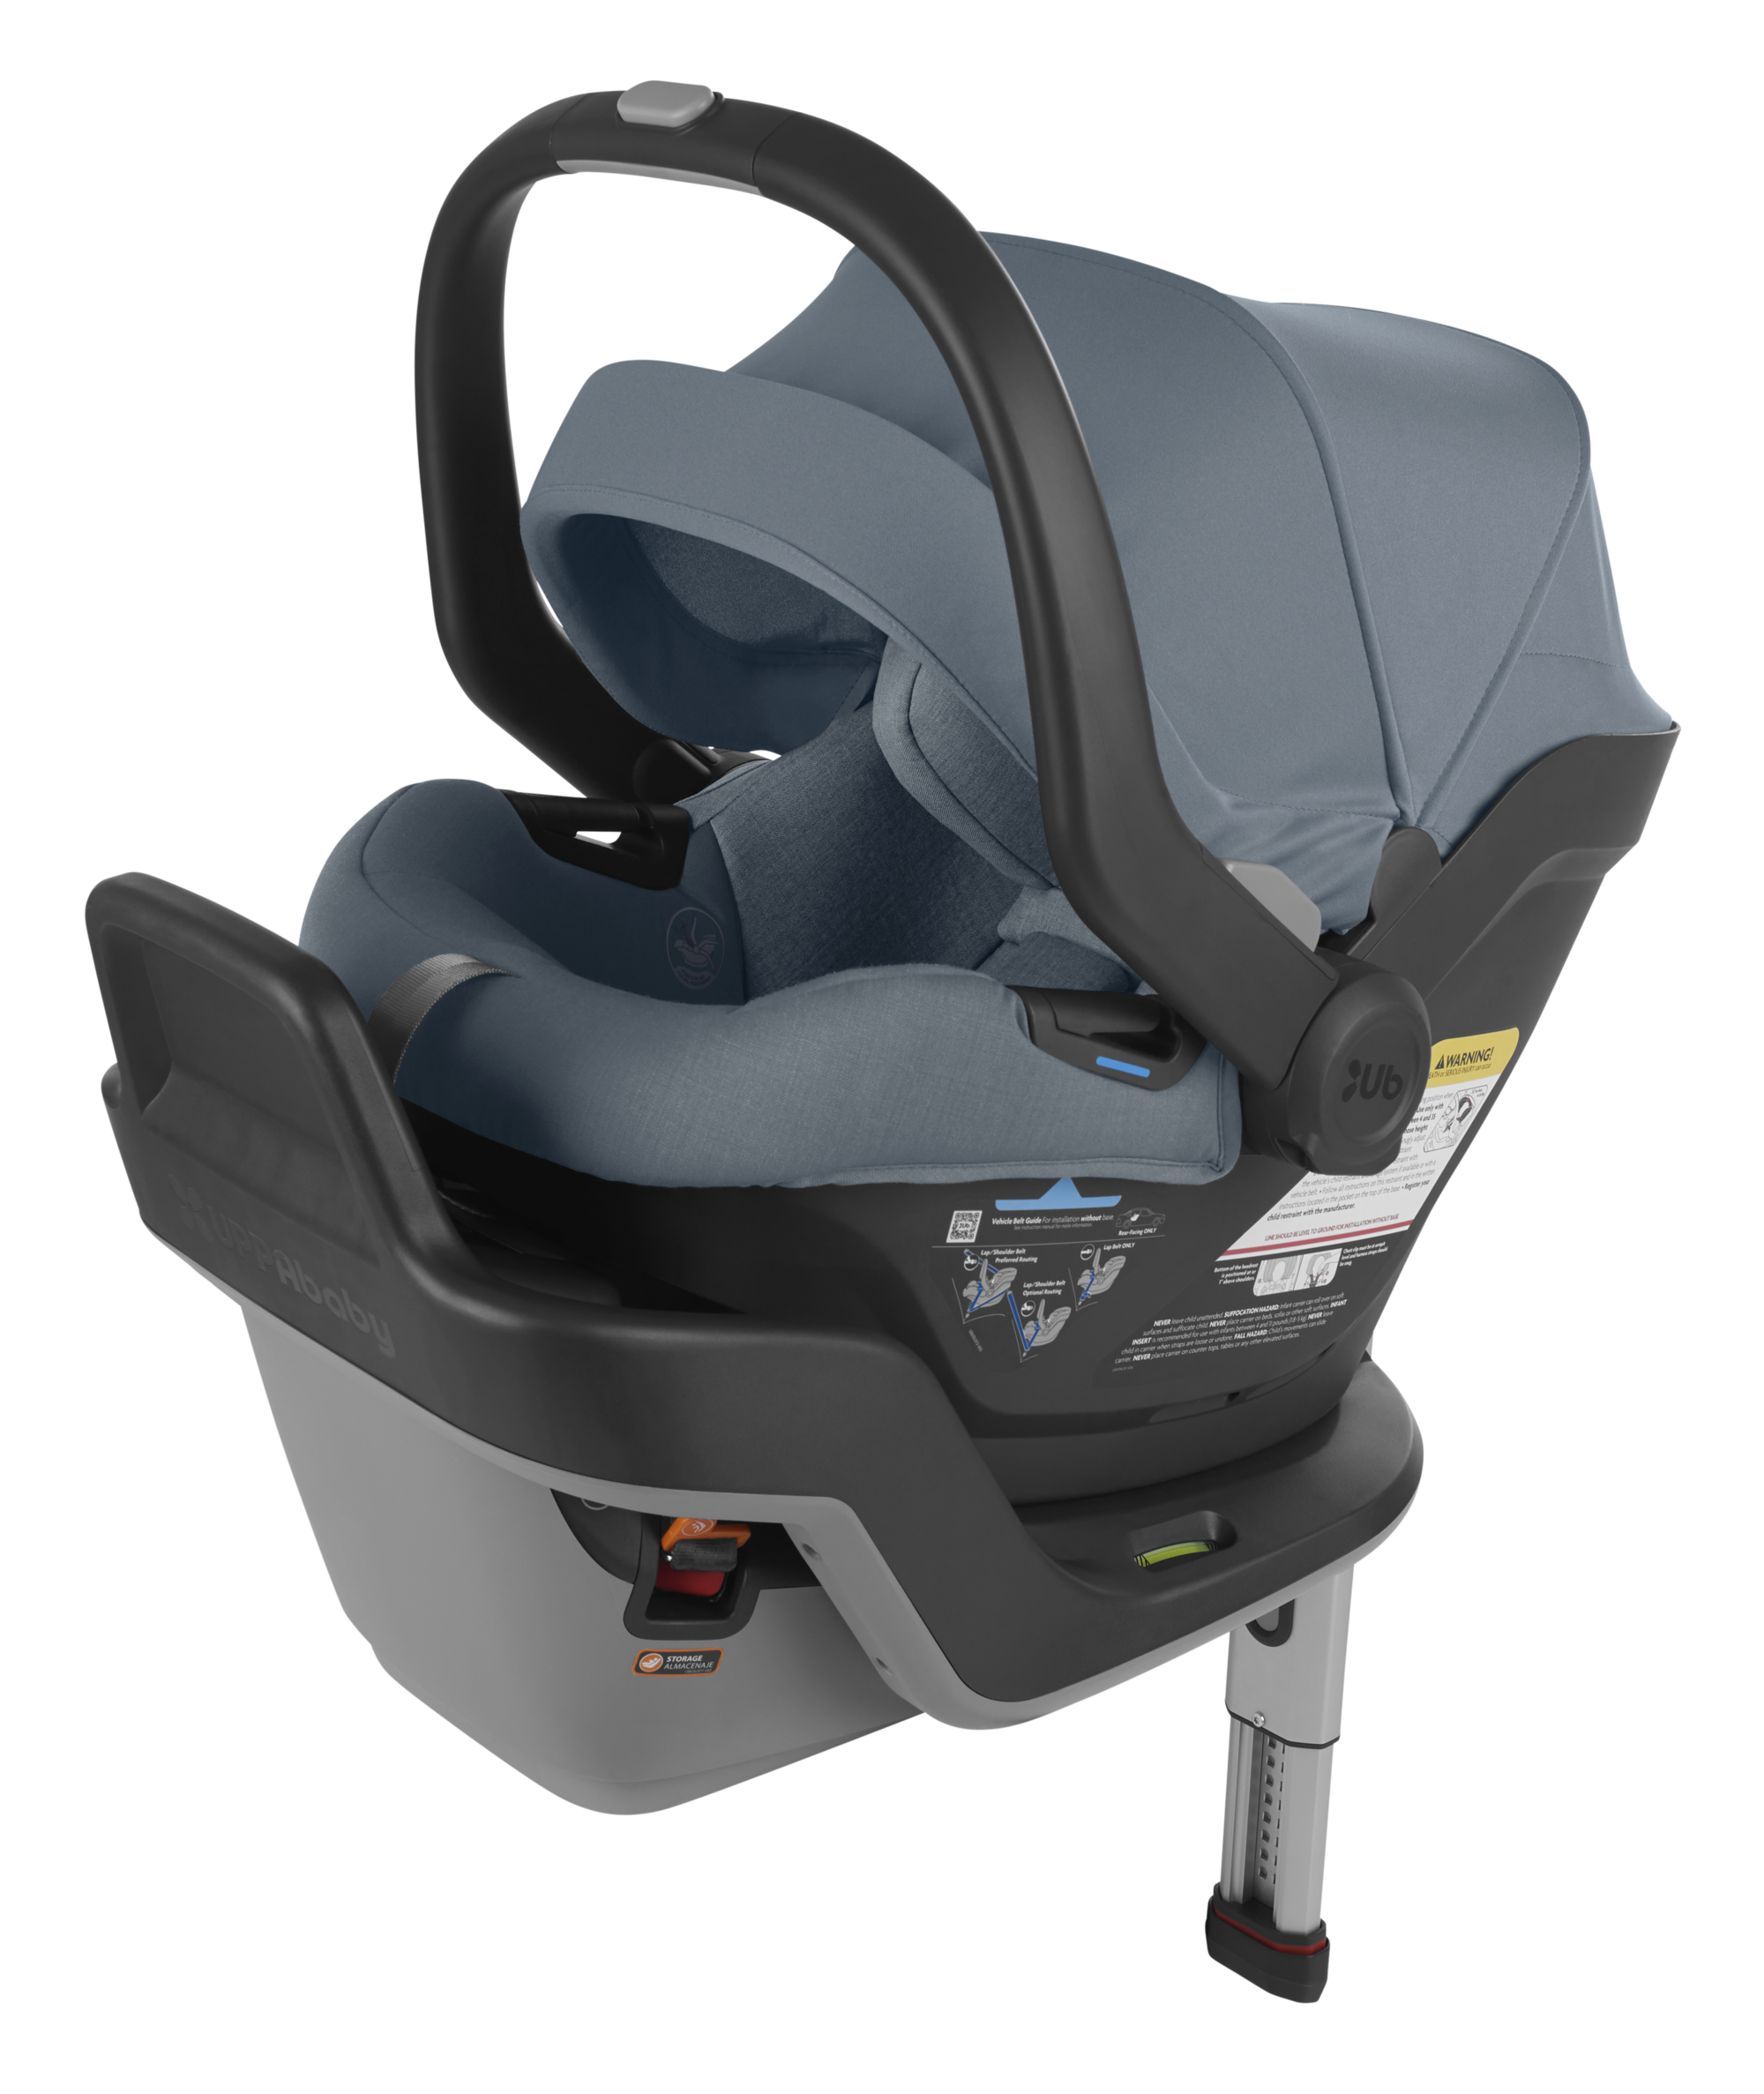 UPPAbaby MESA MAX Infant Car Seat - Gregory 